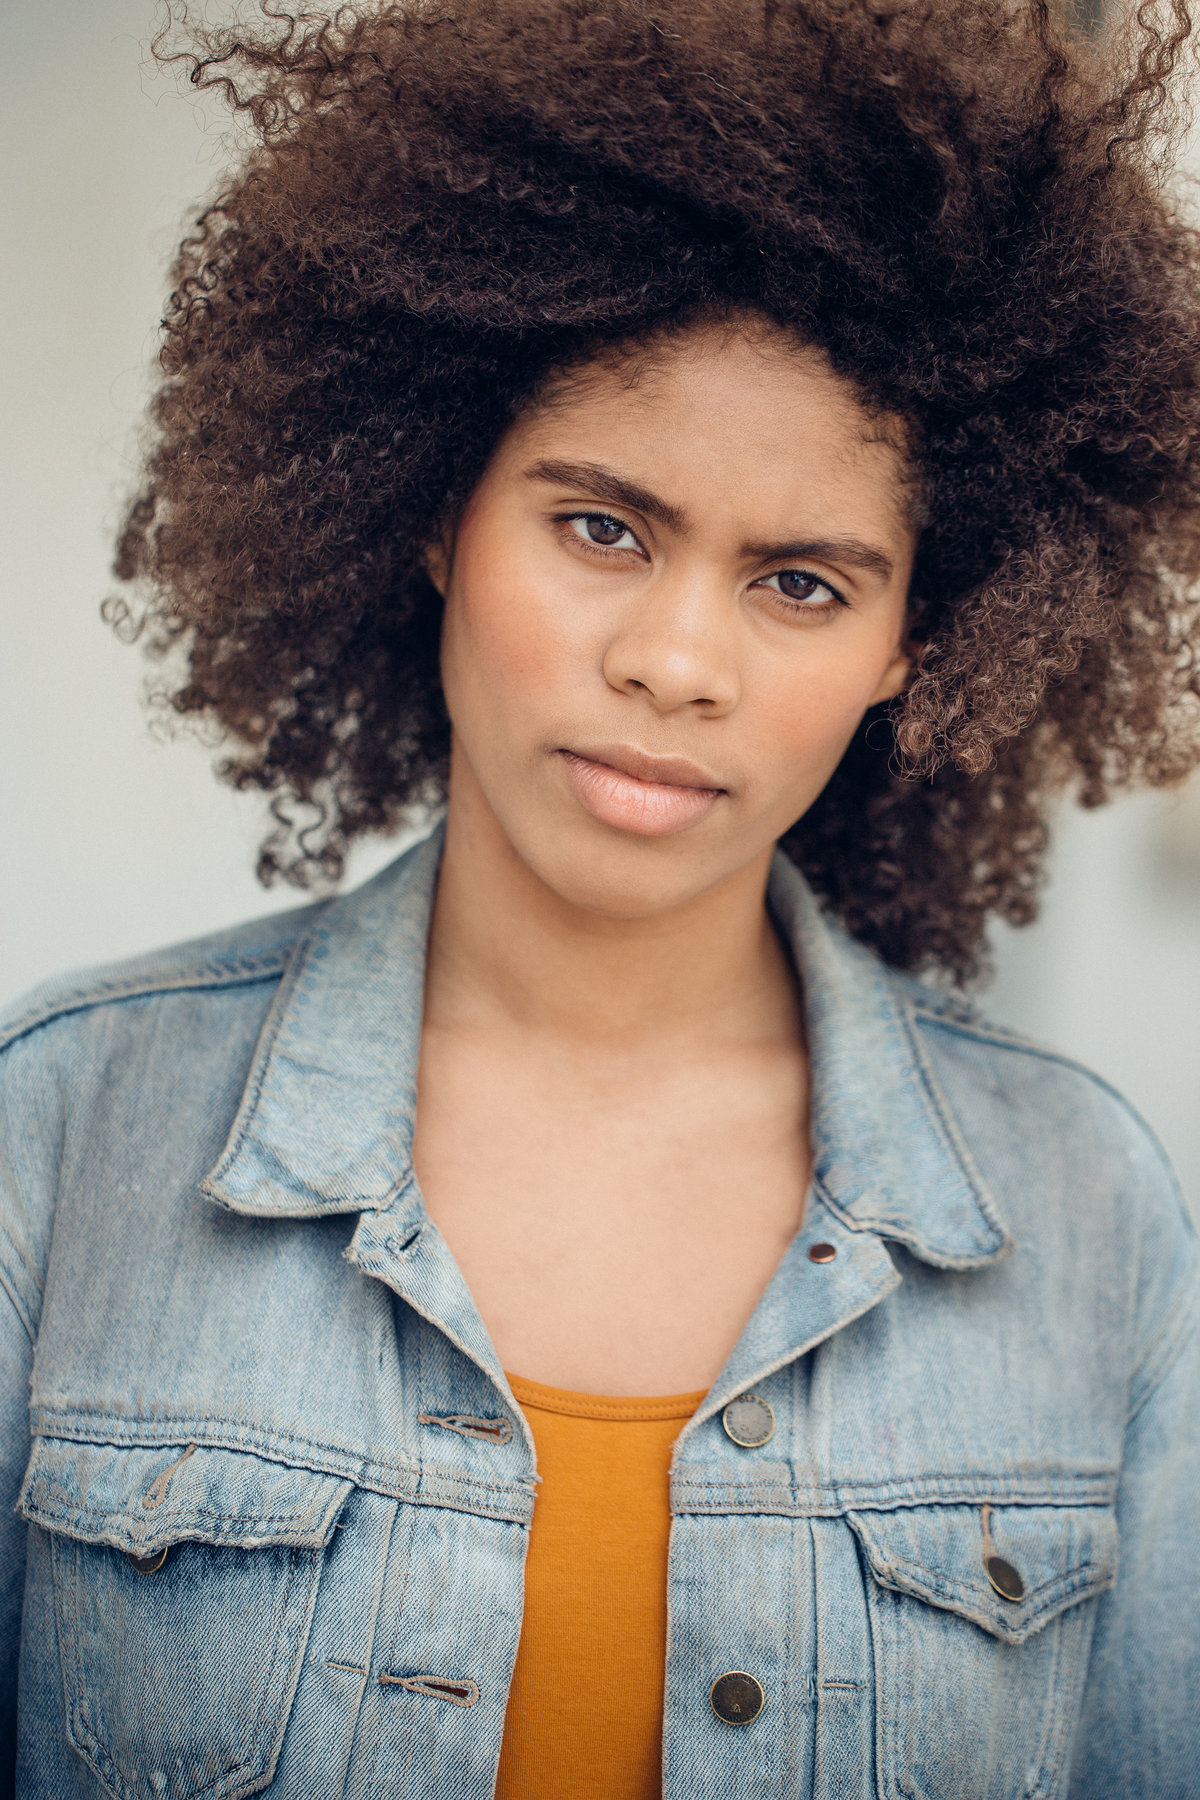 Headshot Photograph Of Young Woman In Outer Gray Denim Jacket And Inner Orange Shirt Los Angeles